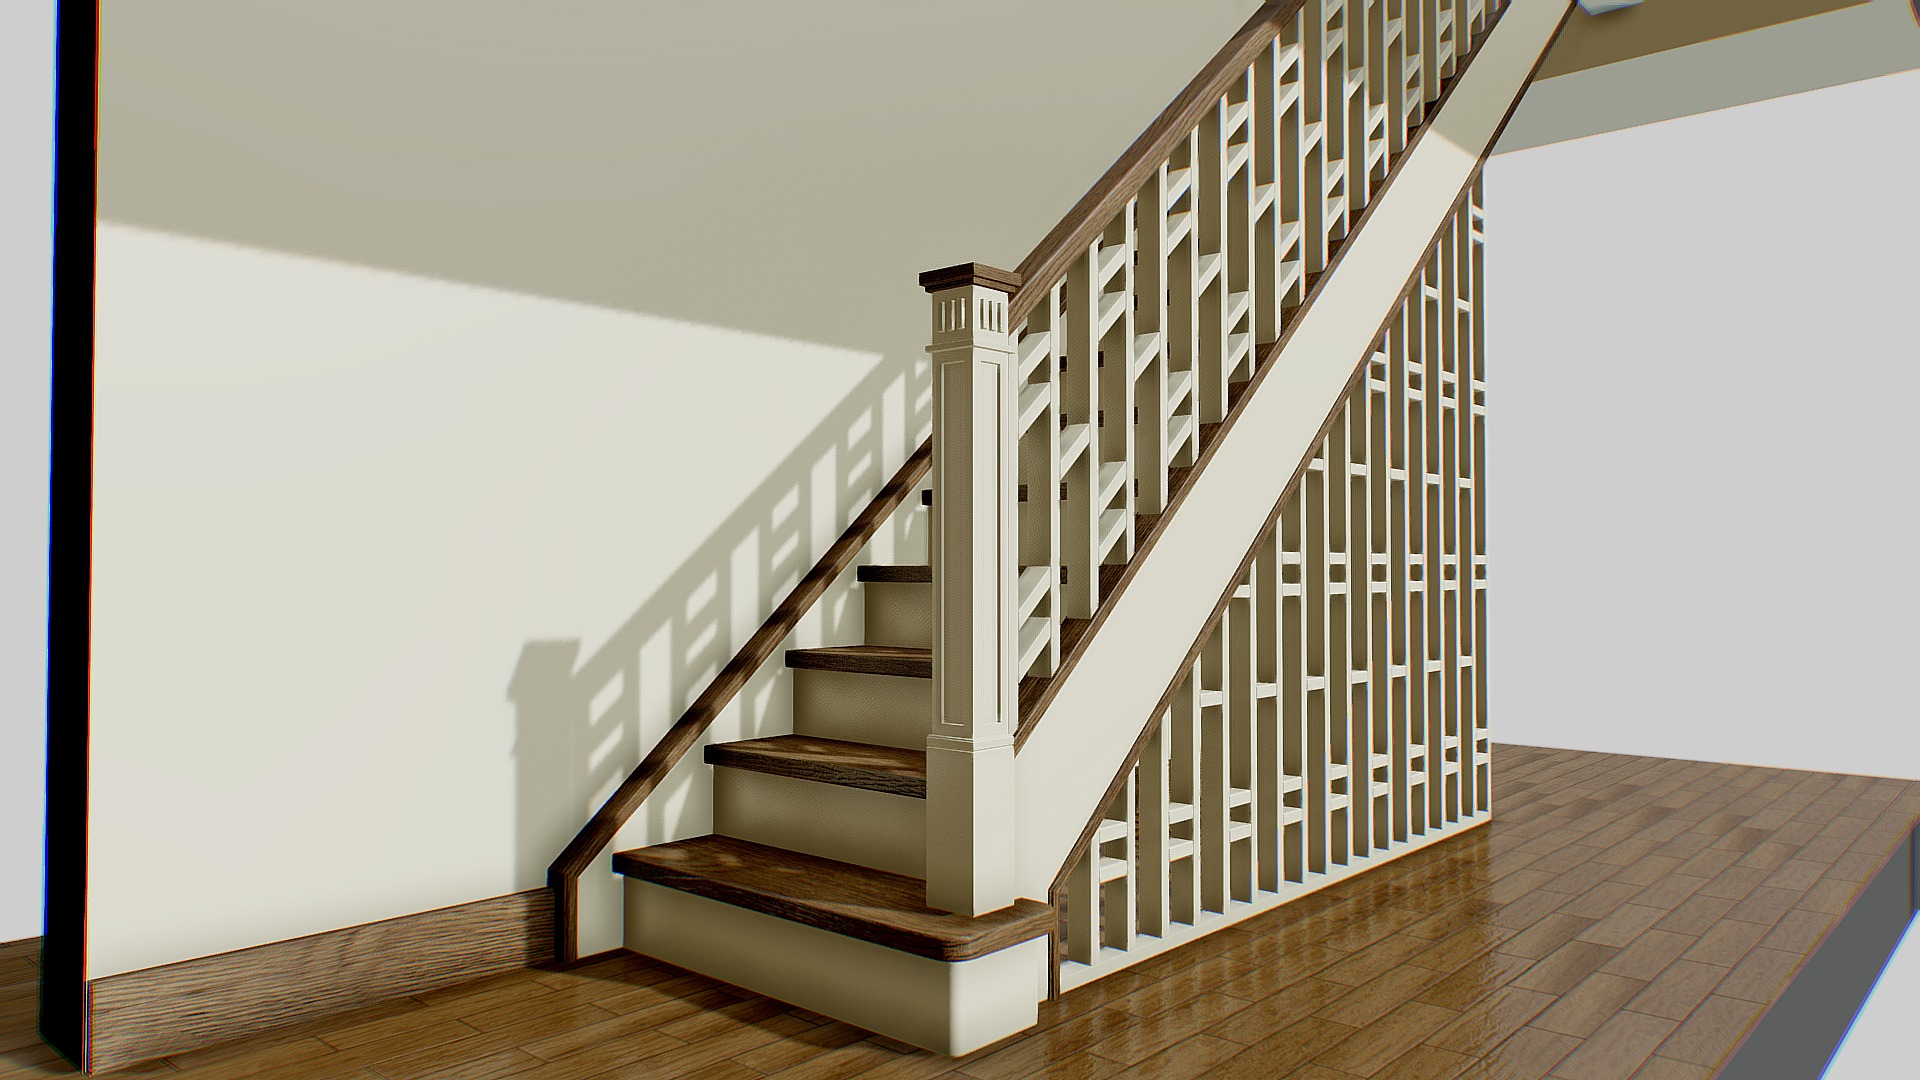 3D model Чехов Лестница - This is a 3D model of the Чехов Лестница. The 3D model is about a staircase with a railing.